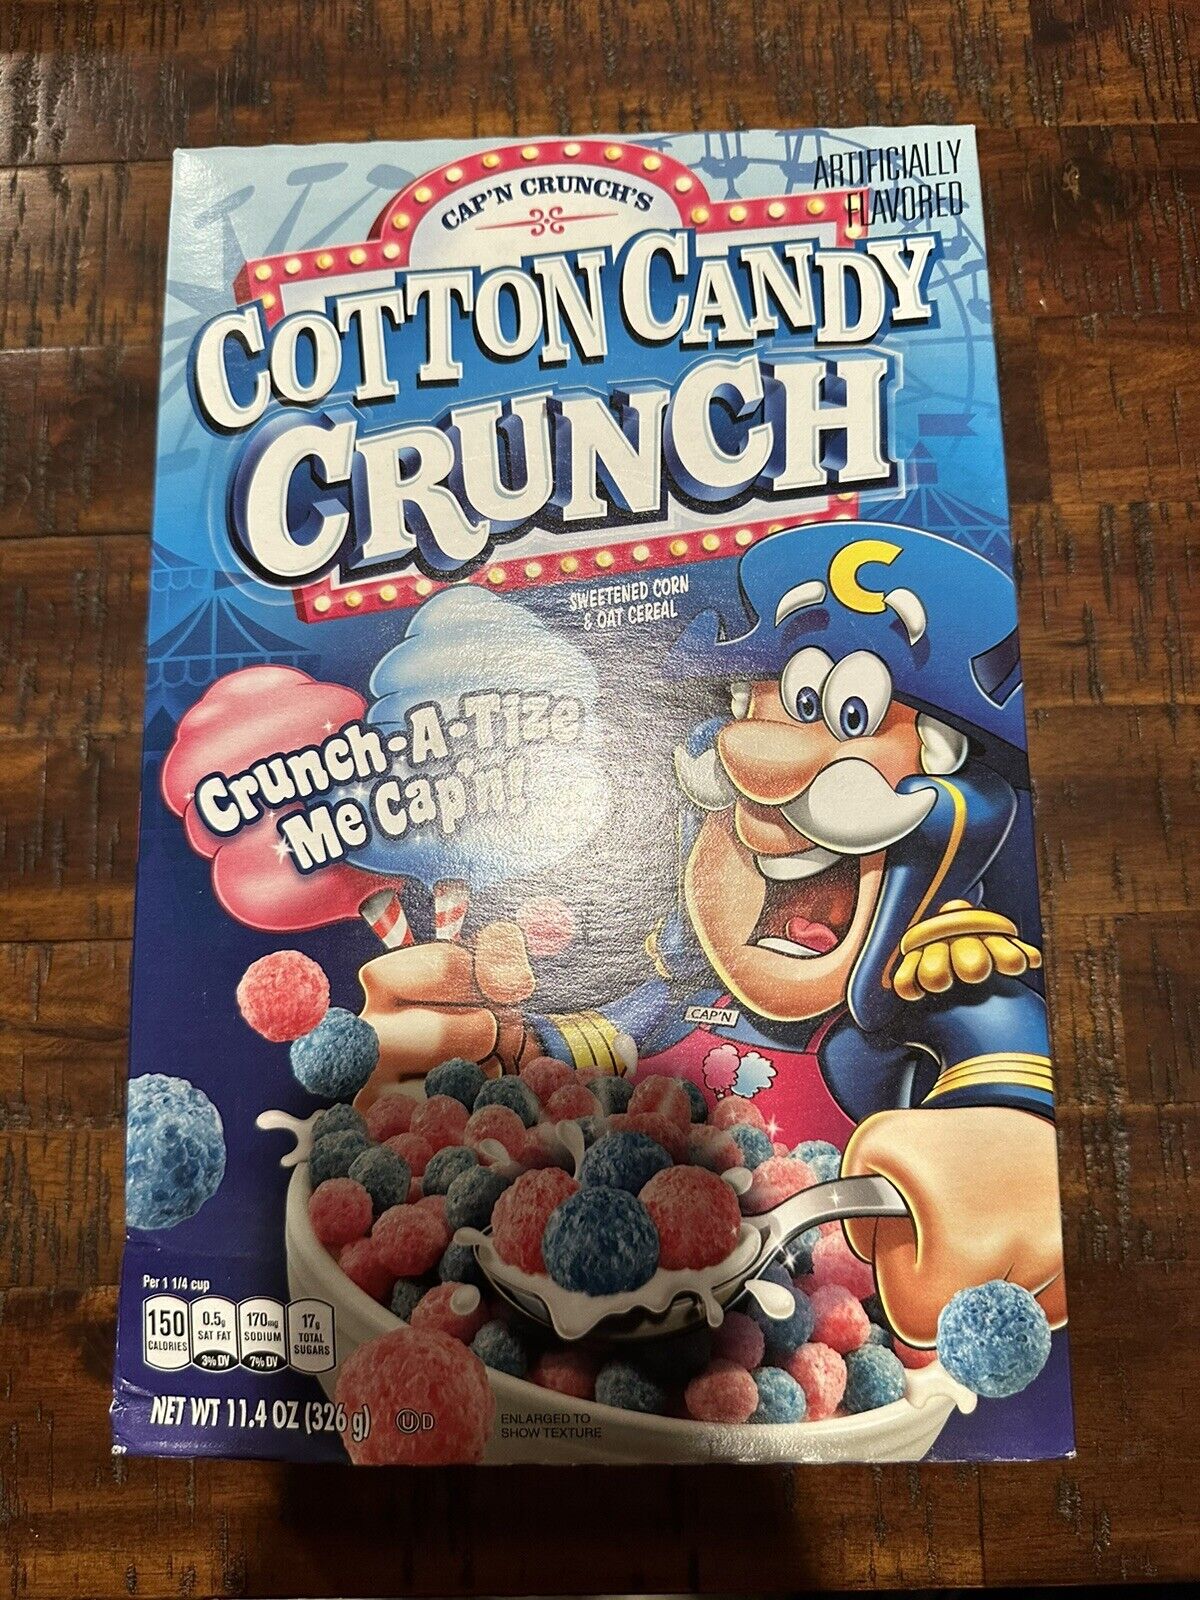 NEW Unopened Cap\'n Crunch\'s Cotton Candy Crunch Cereal Collectable Limited